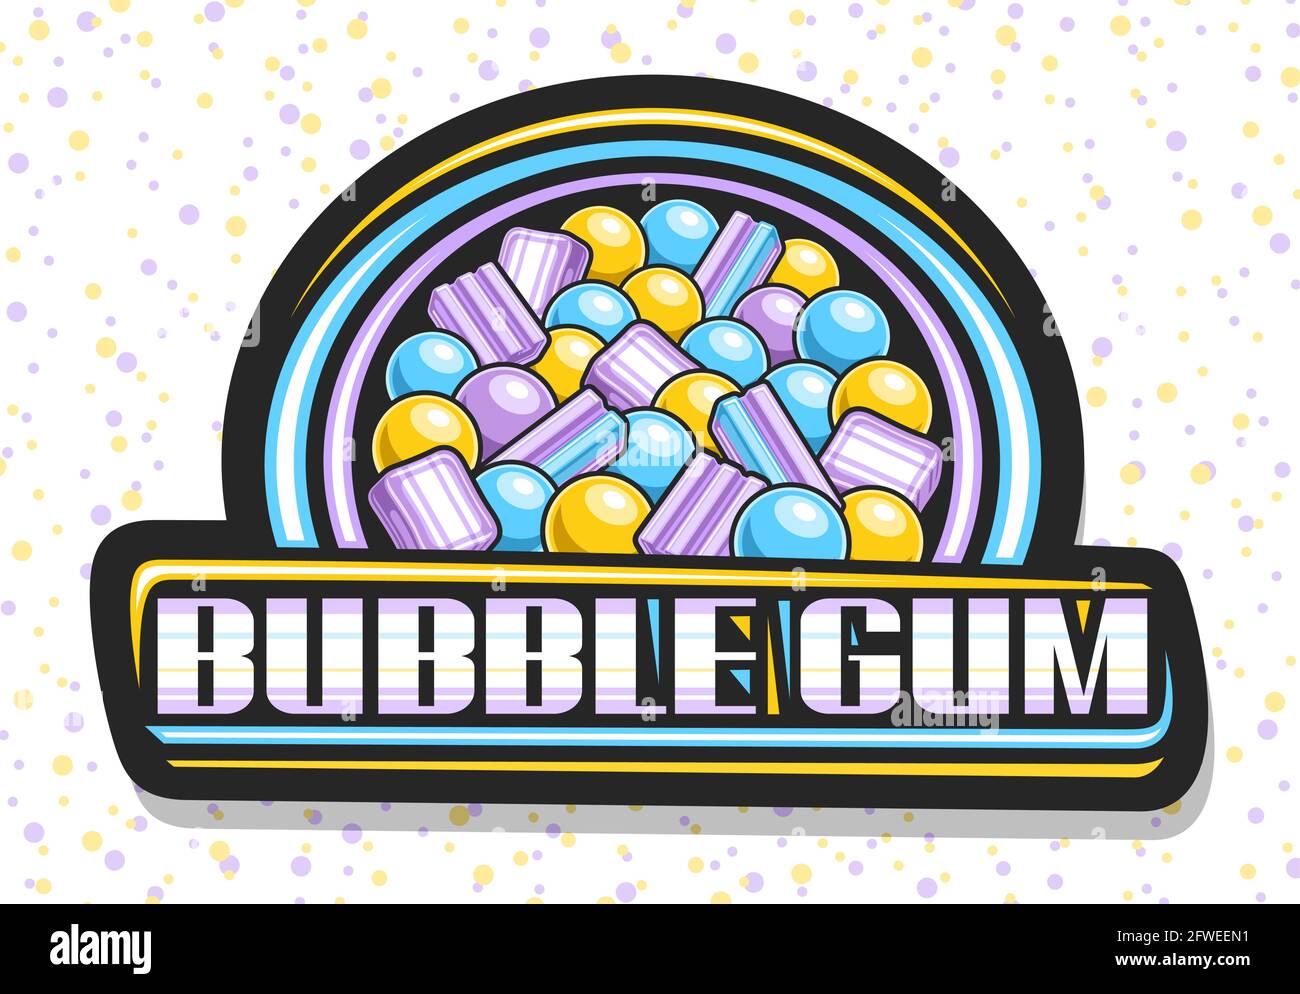 Vector logo for Bubble Gum, black decorative signboard with illustration of different colorful bubblegums and candy, dark badge with unique brush lett Stock Vector